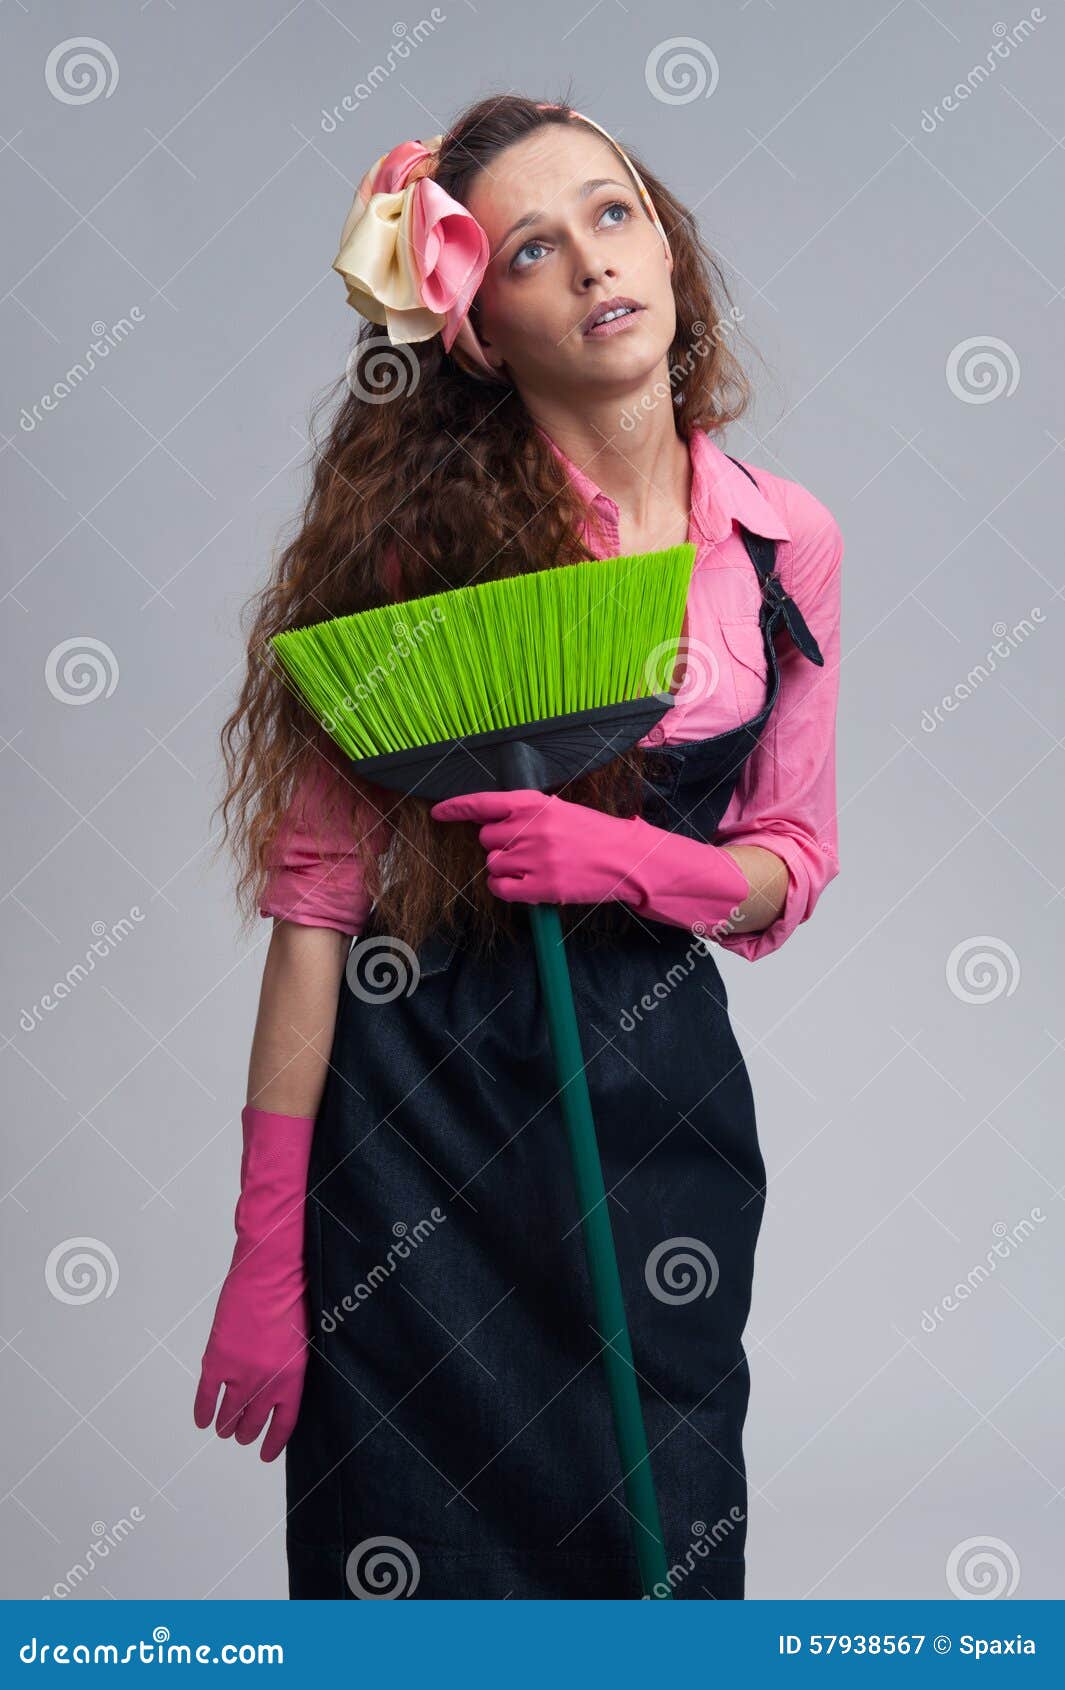 Tired maid stock image. Image of housewife, chores, facial - 57938567